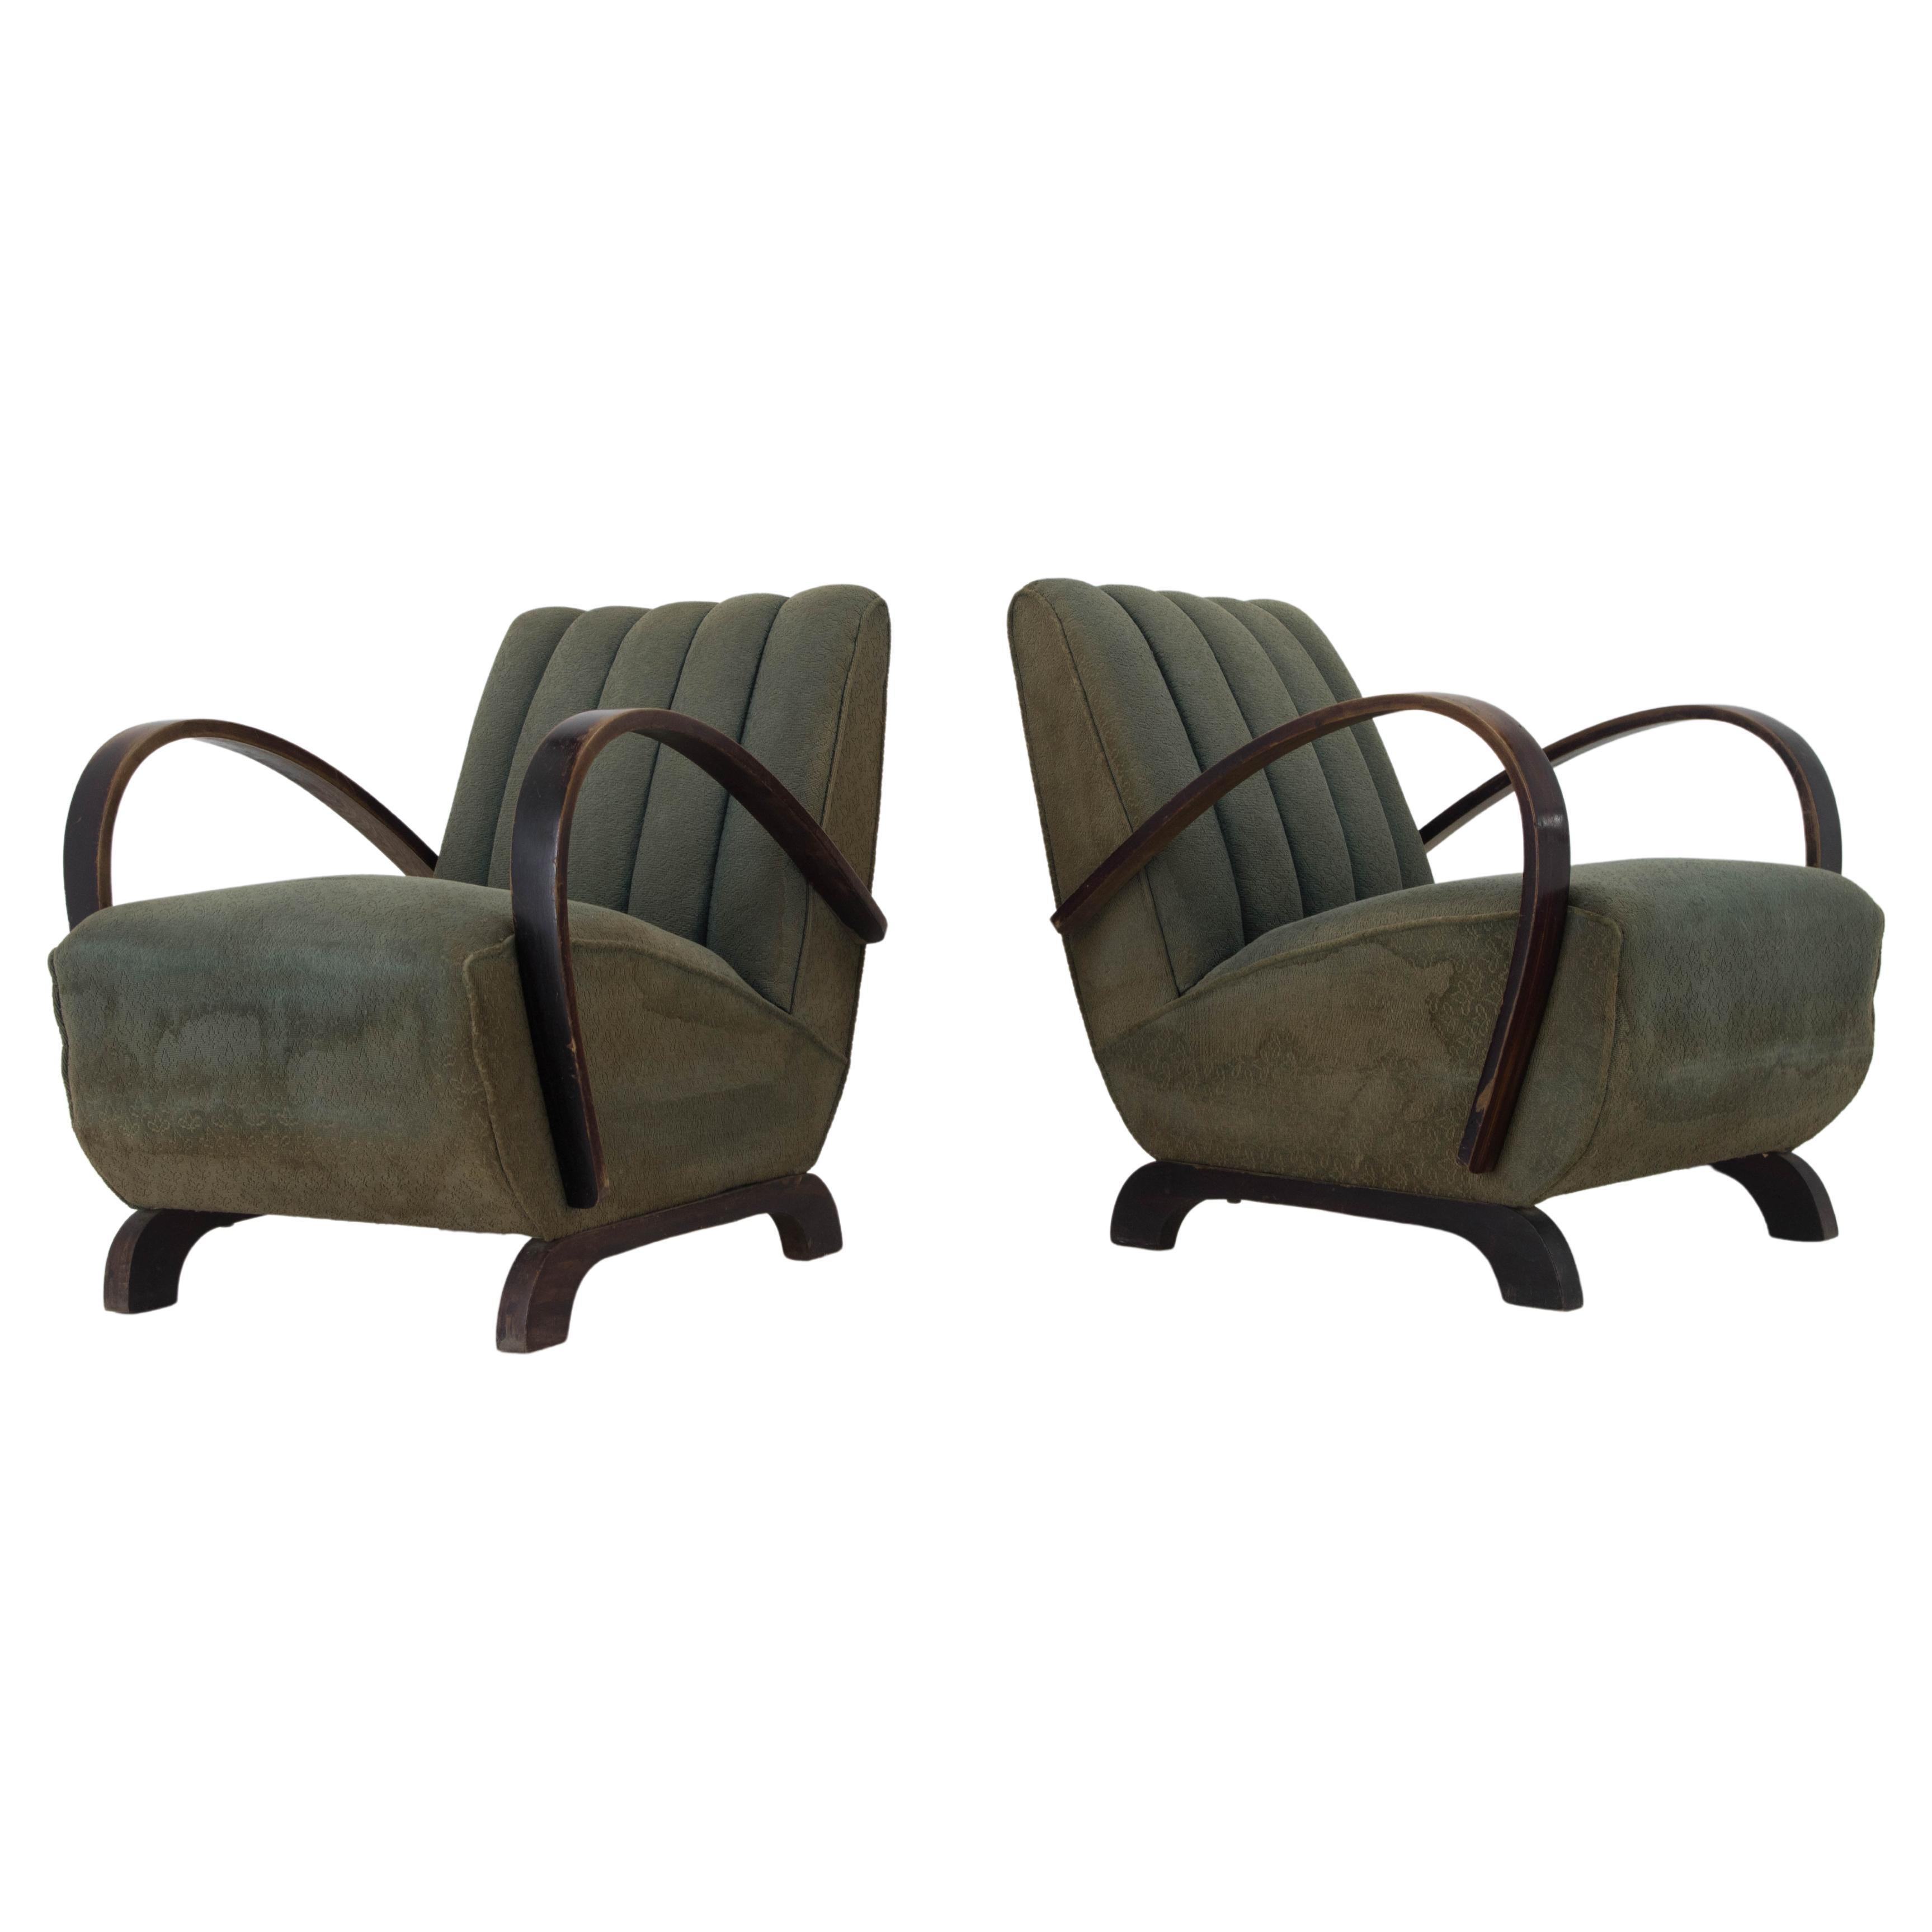 Set of Two Art Deco Armchairs by Jindrich Halabala, 1940s For Sale